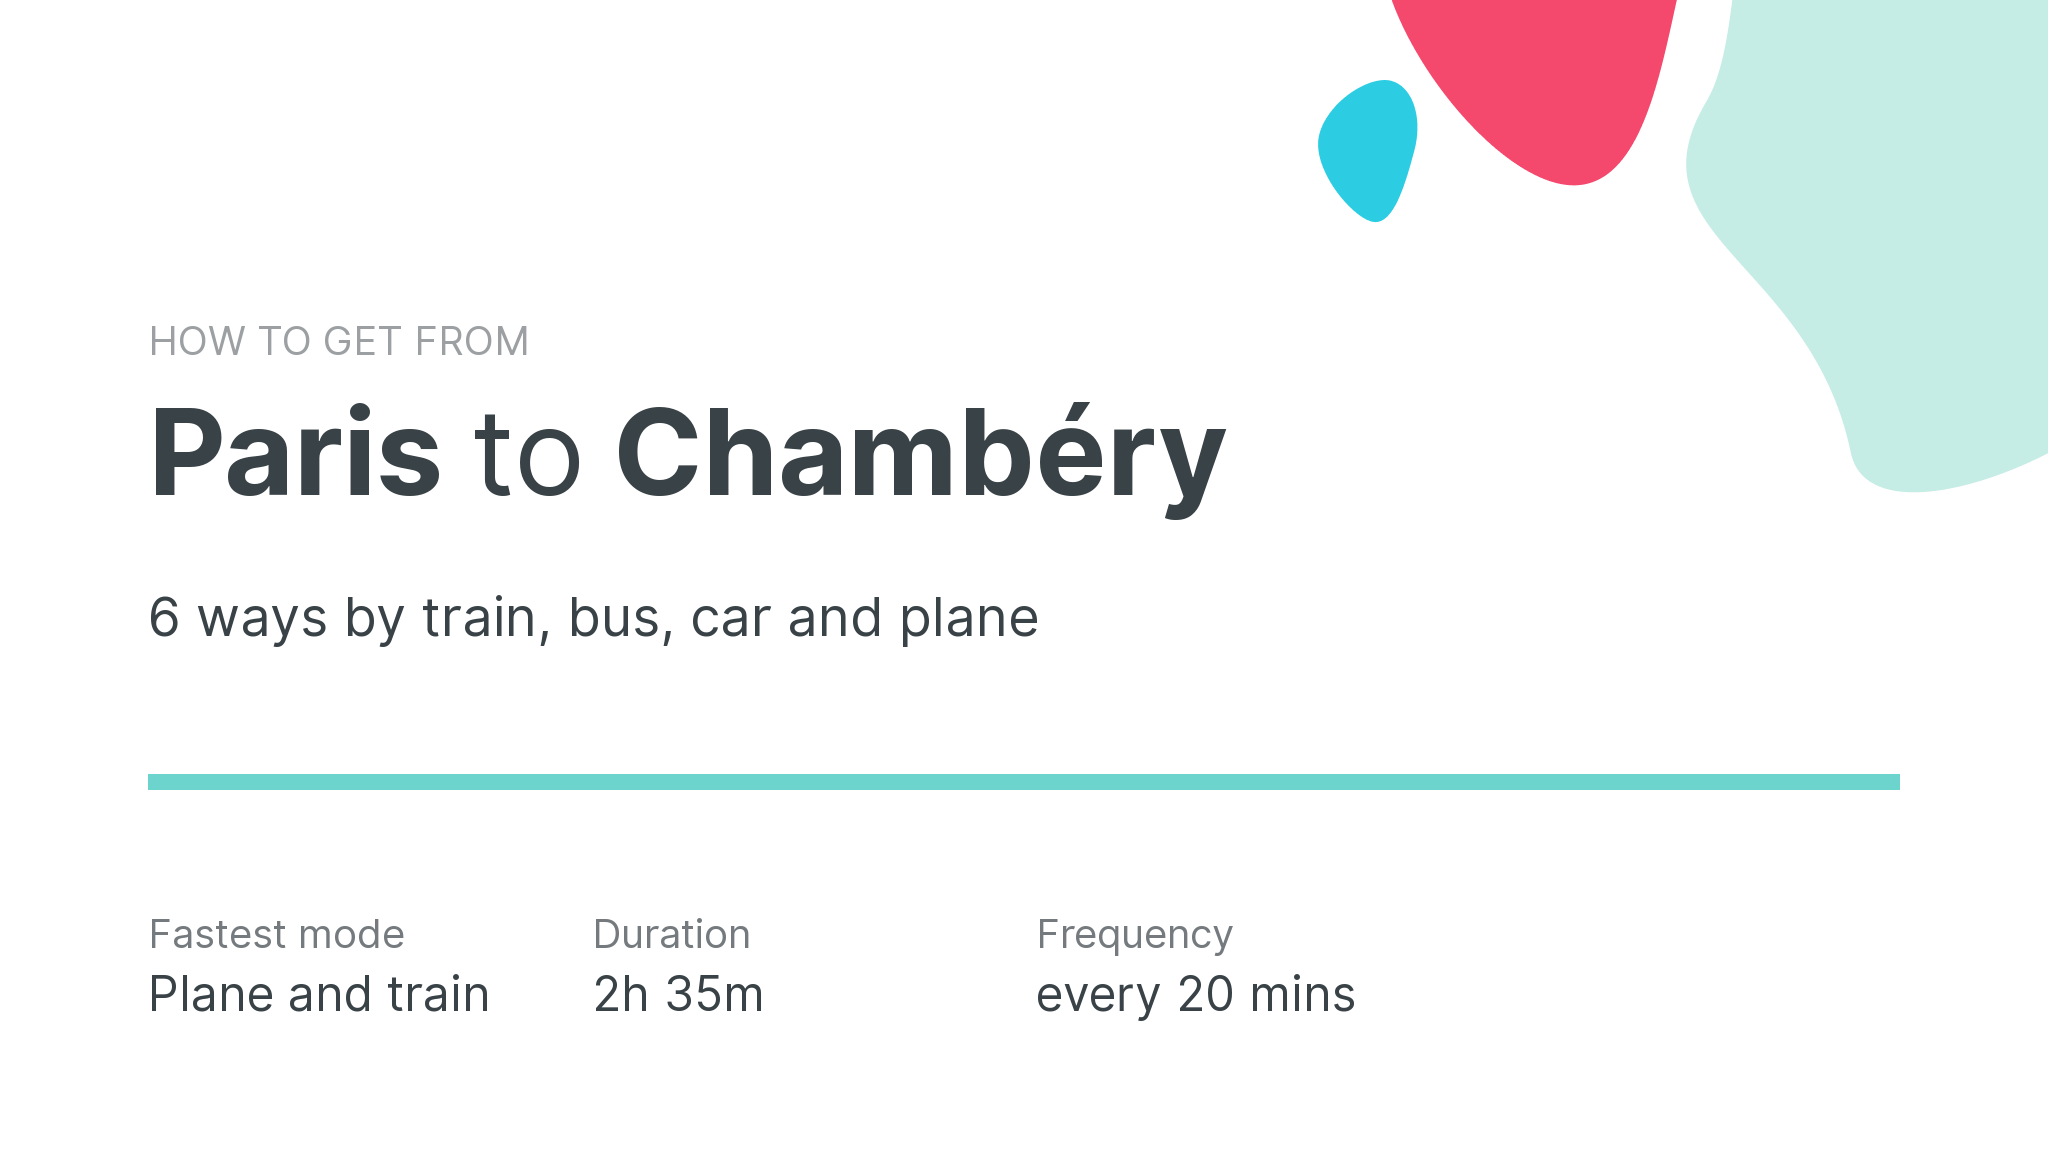 How do I get from Paris to Chambéry